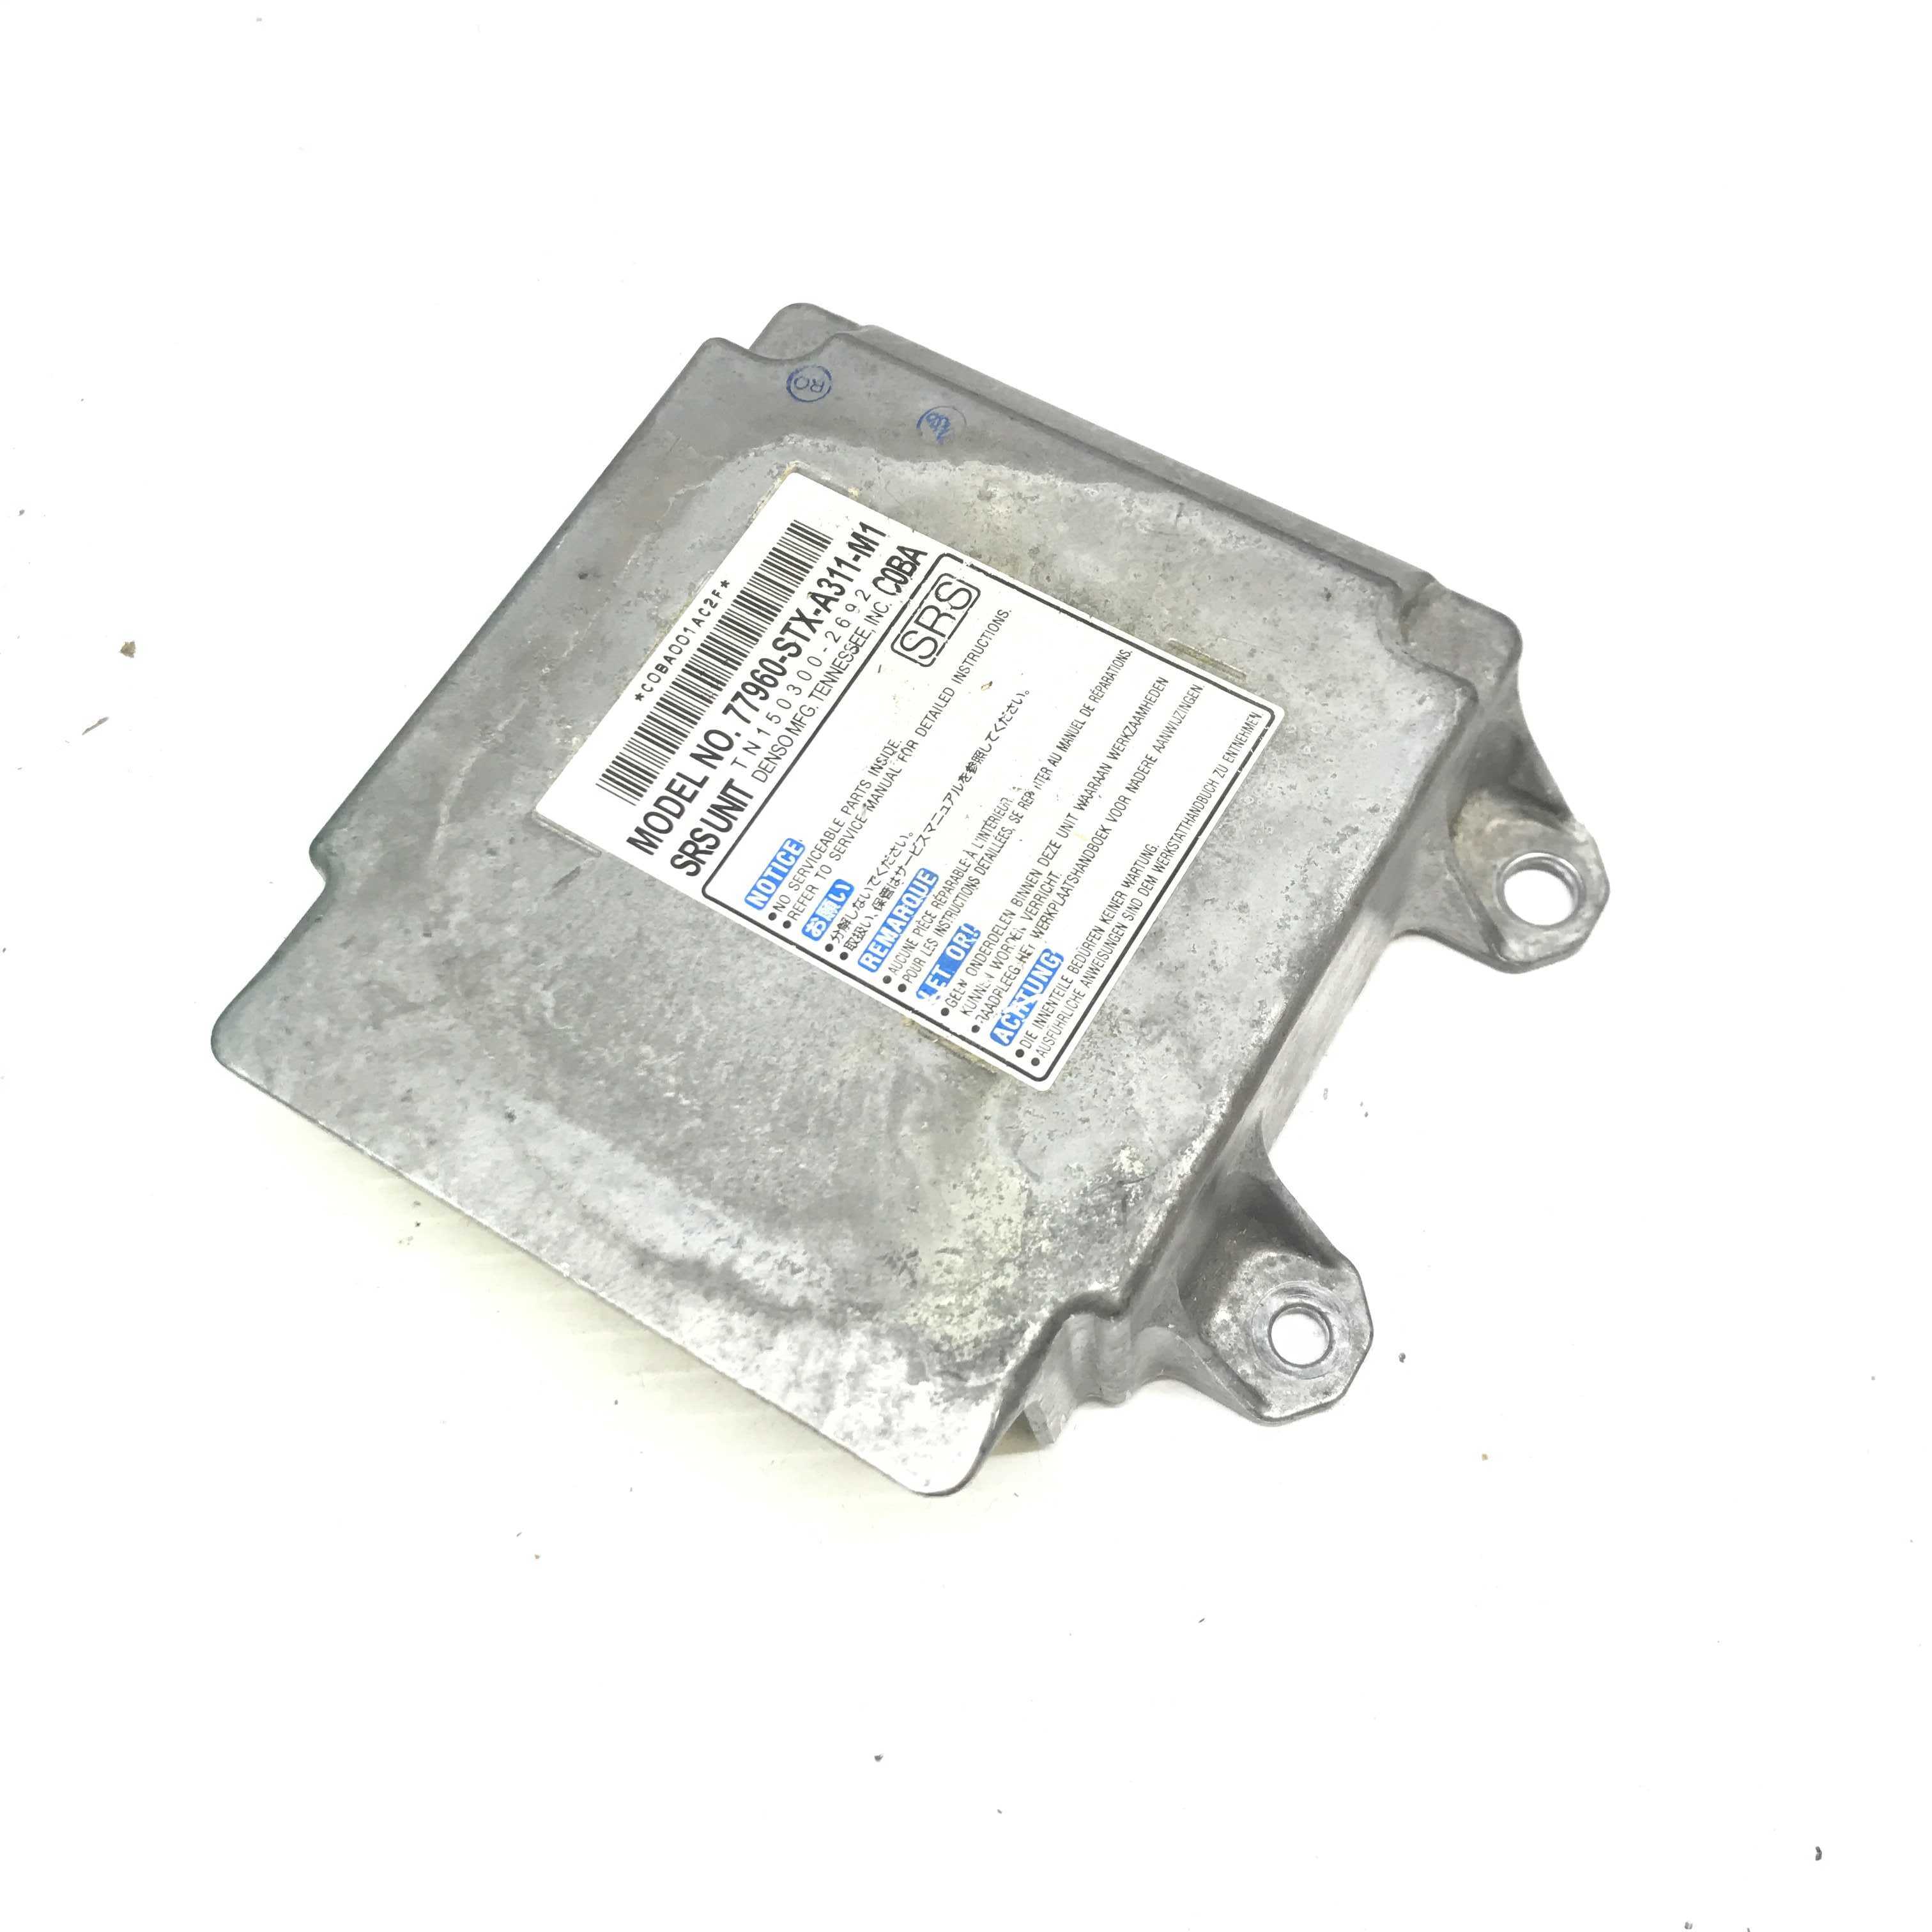 ACURA MDX SRS Airbag Computer Diagnostic Control Module PART #77960STXA311M1